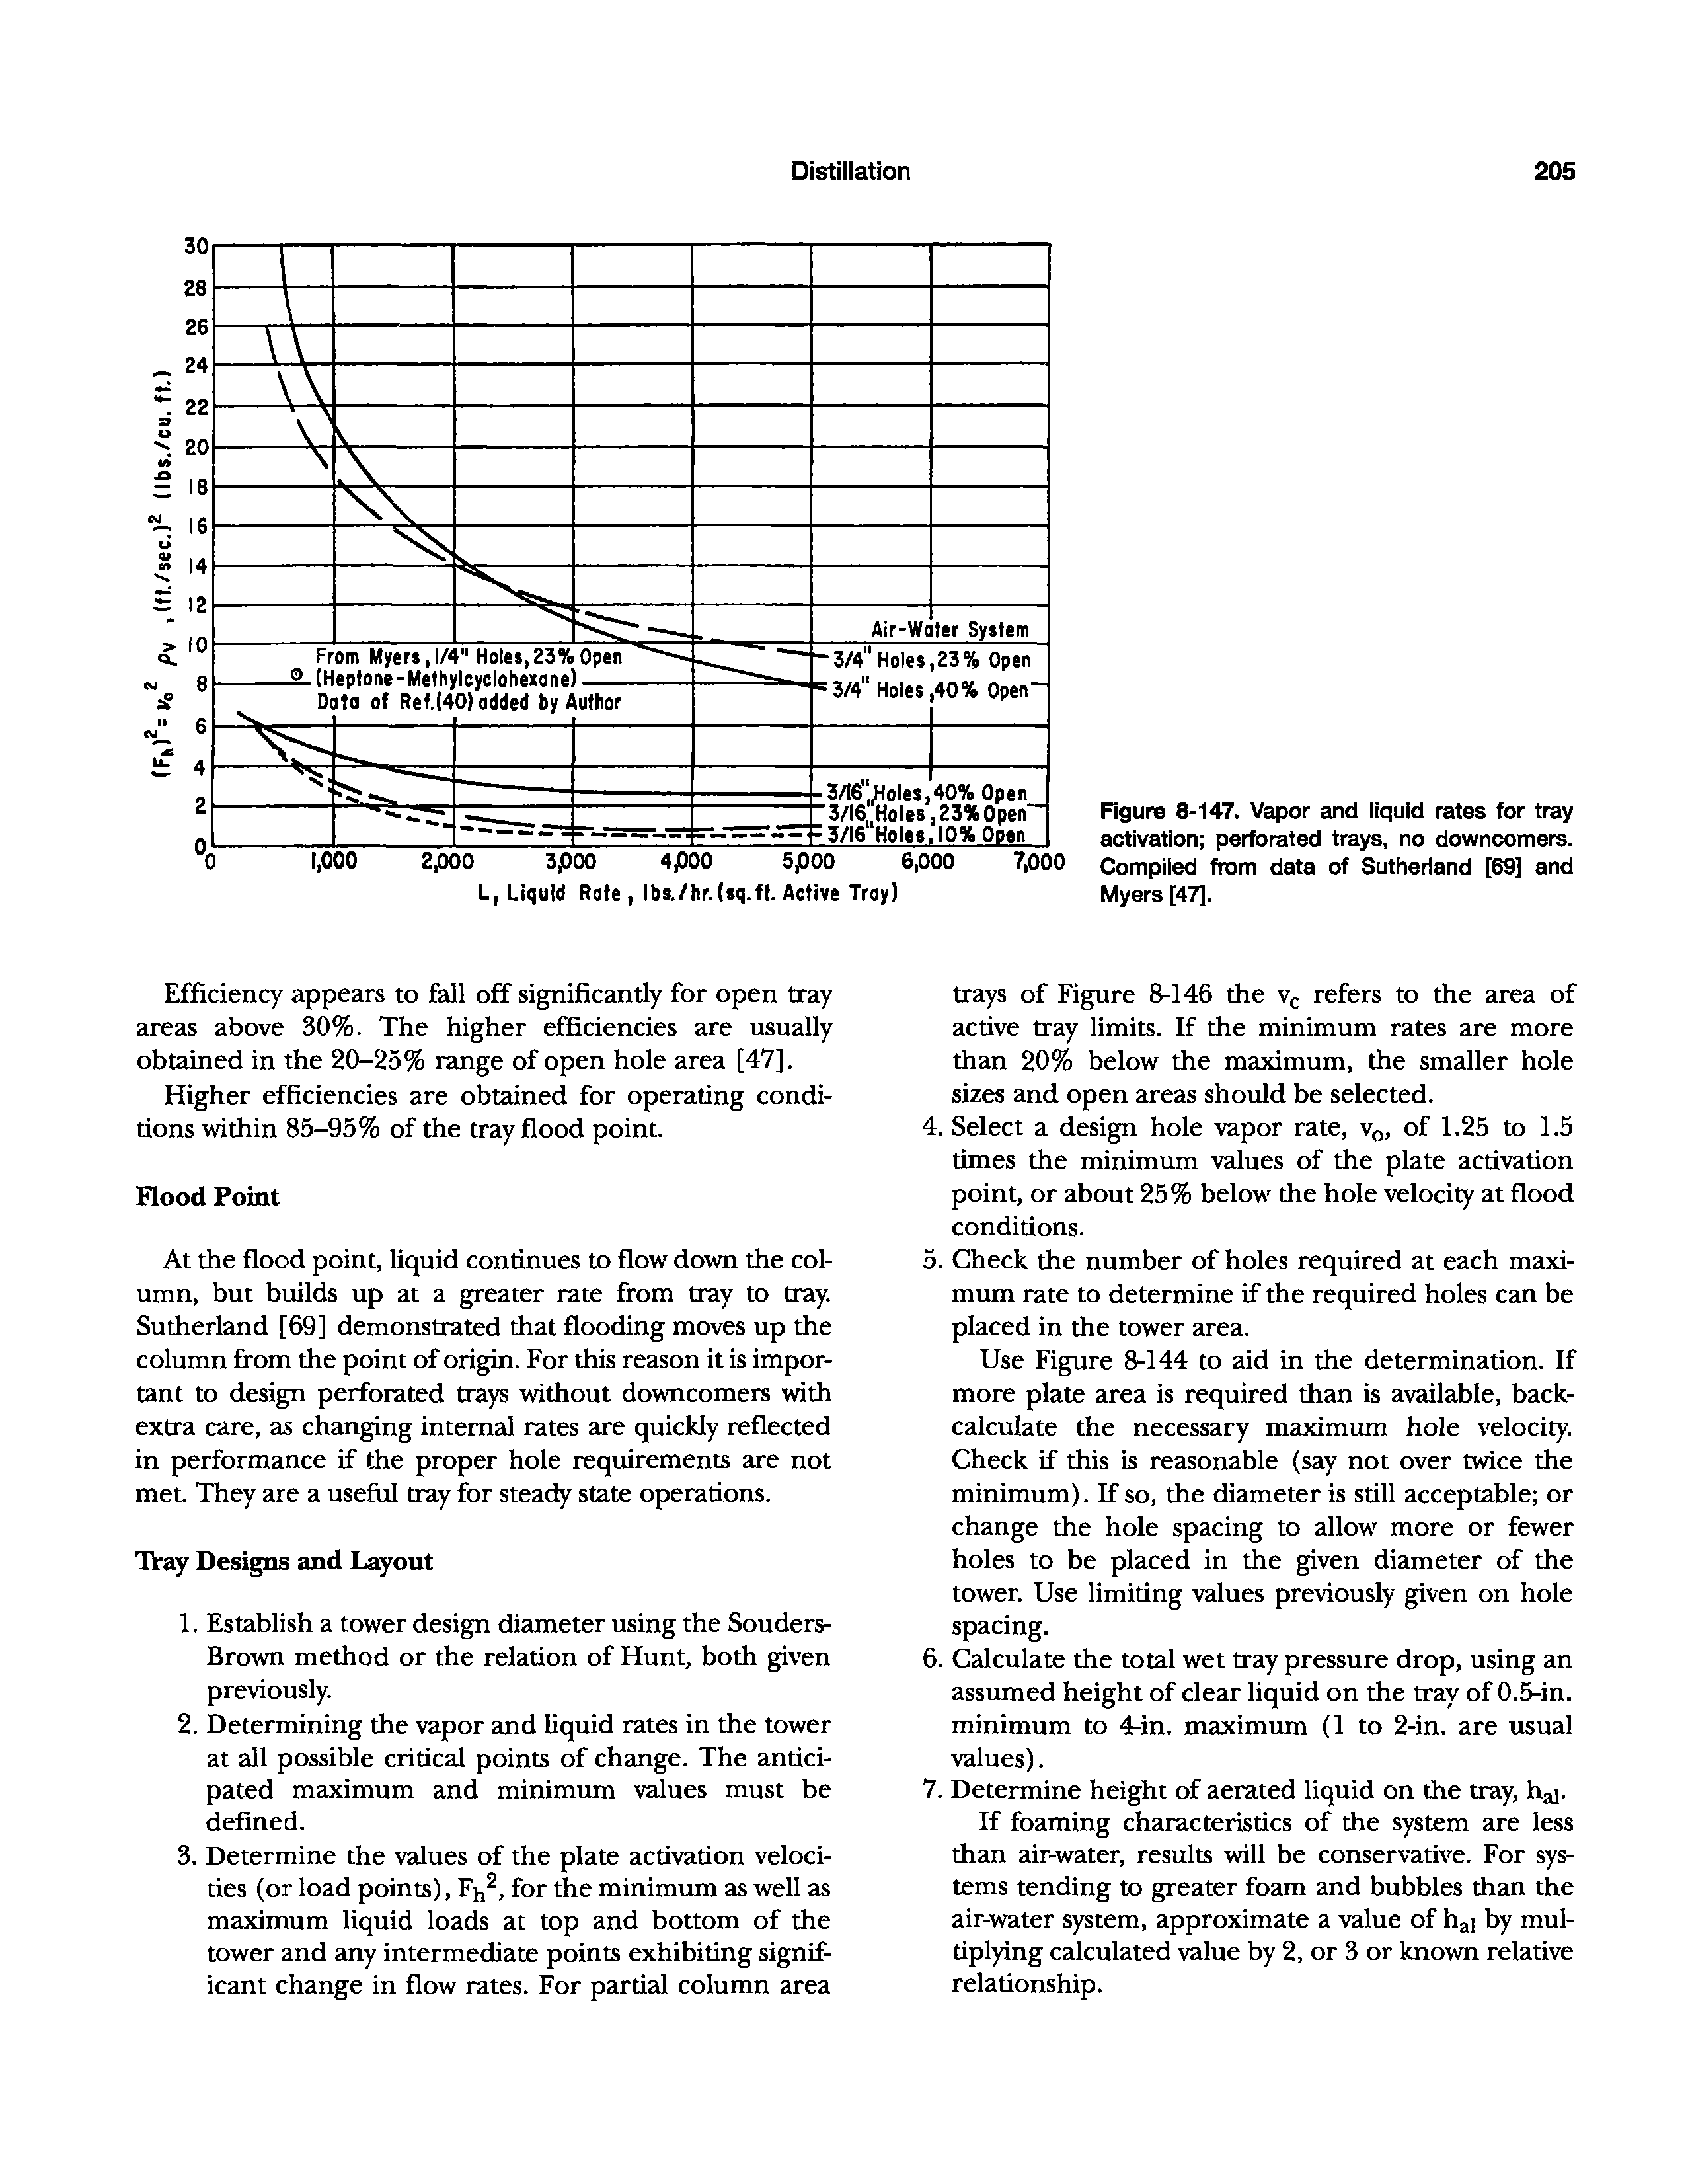 Figure 8-147. Veipor and liquid rates for tray activation perforated trays, no downcomers. Compiled from data of Sutherland [69] and Myers [47].